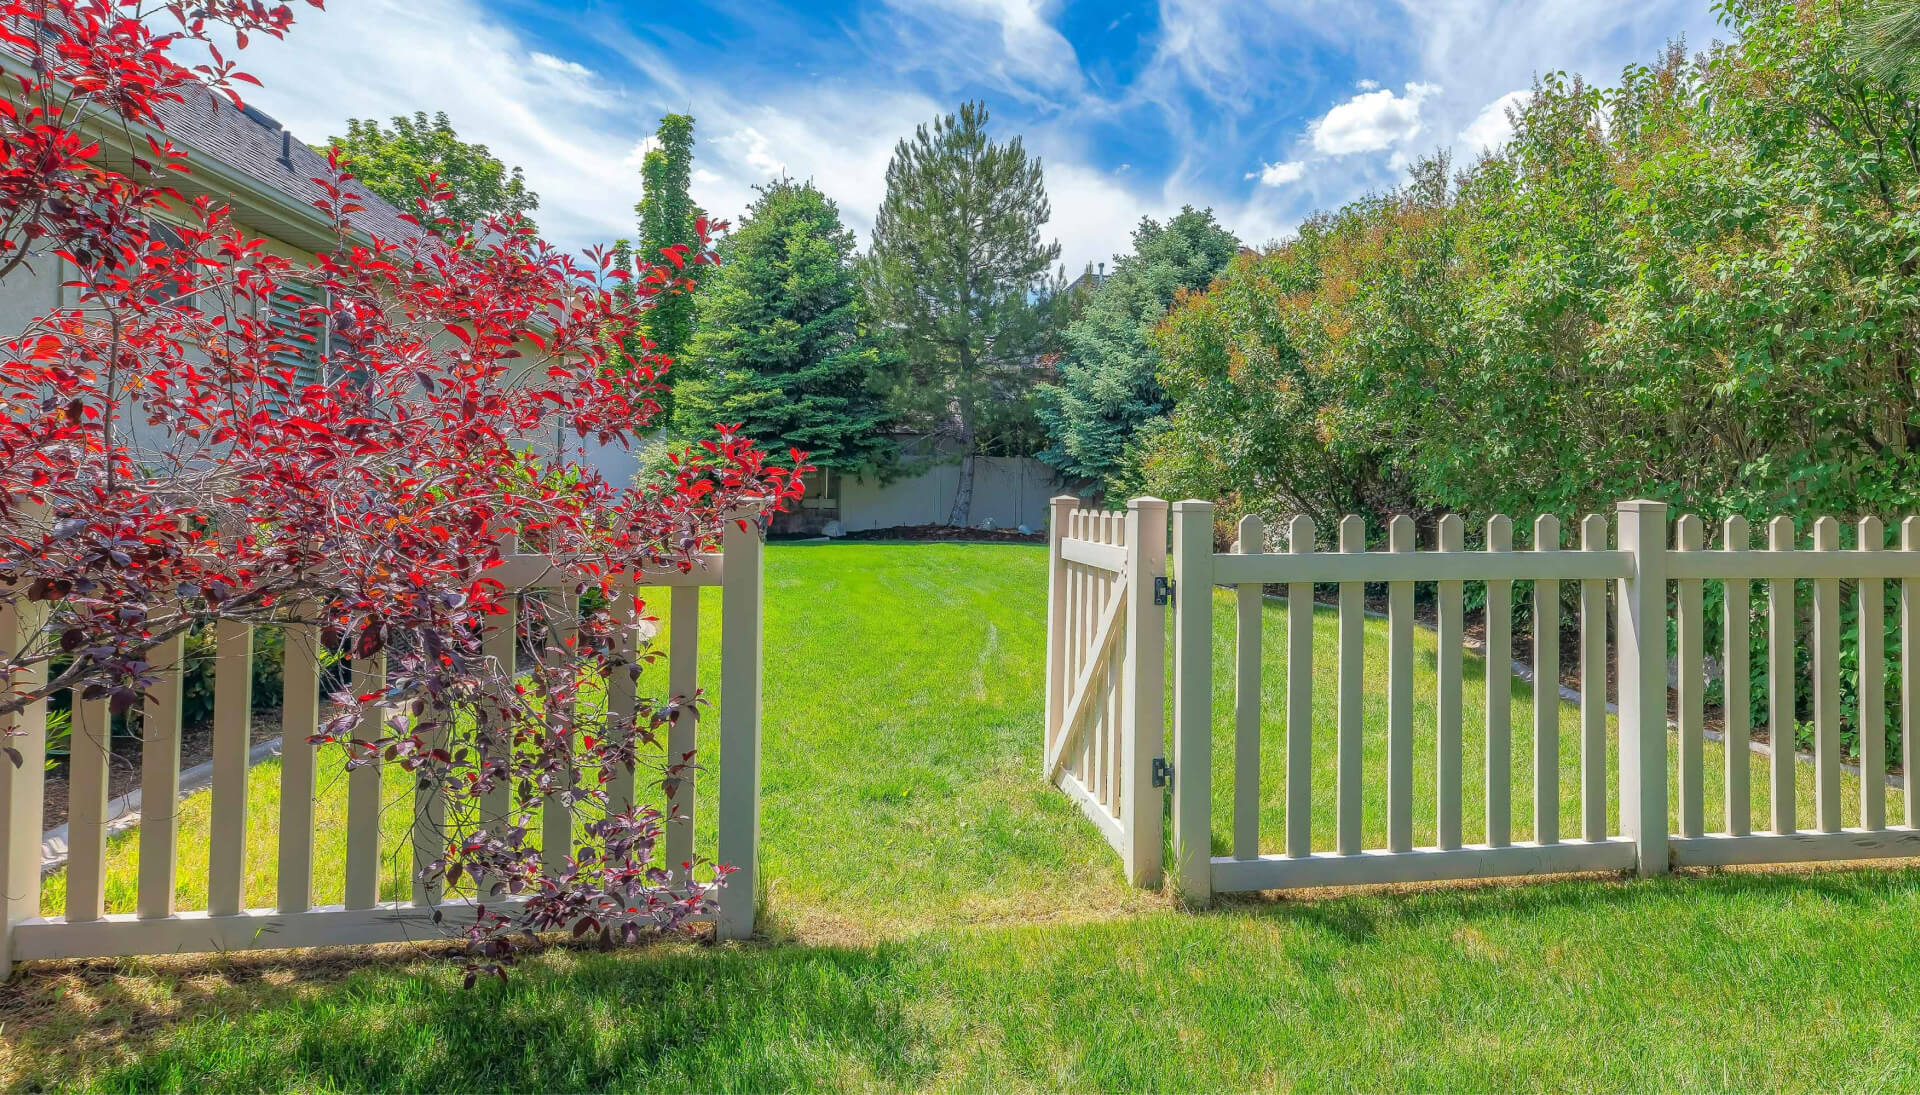 A functional fence gate providing access to a well-maintained backyard, surrounded by a wooden fence in Augusta